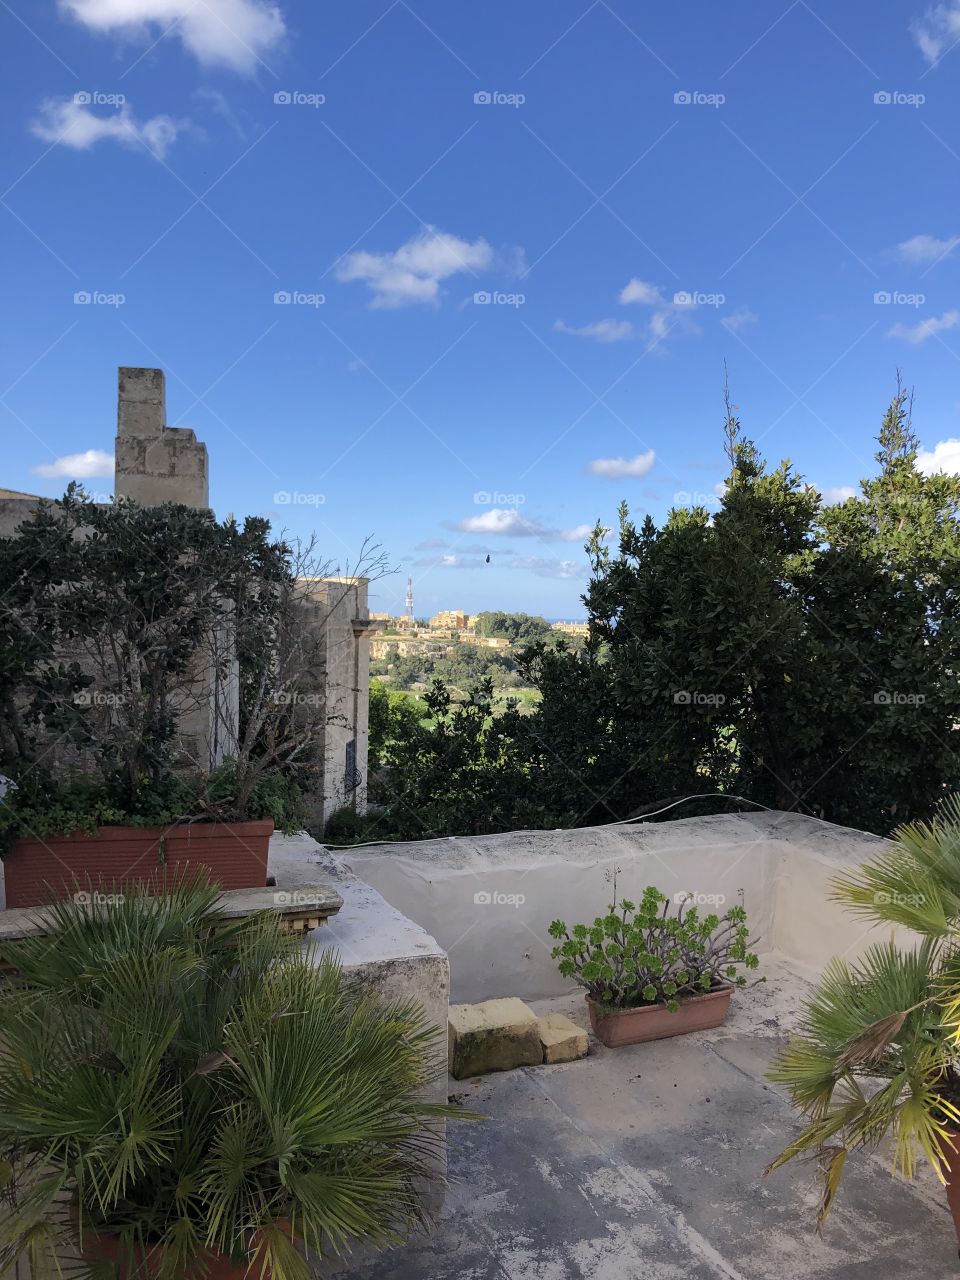 Stunning views taken from a nearby rooftop of hidden green, growing life in Mdina, Malta. 